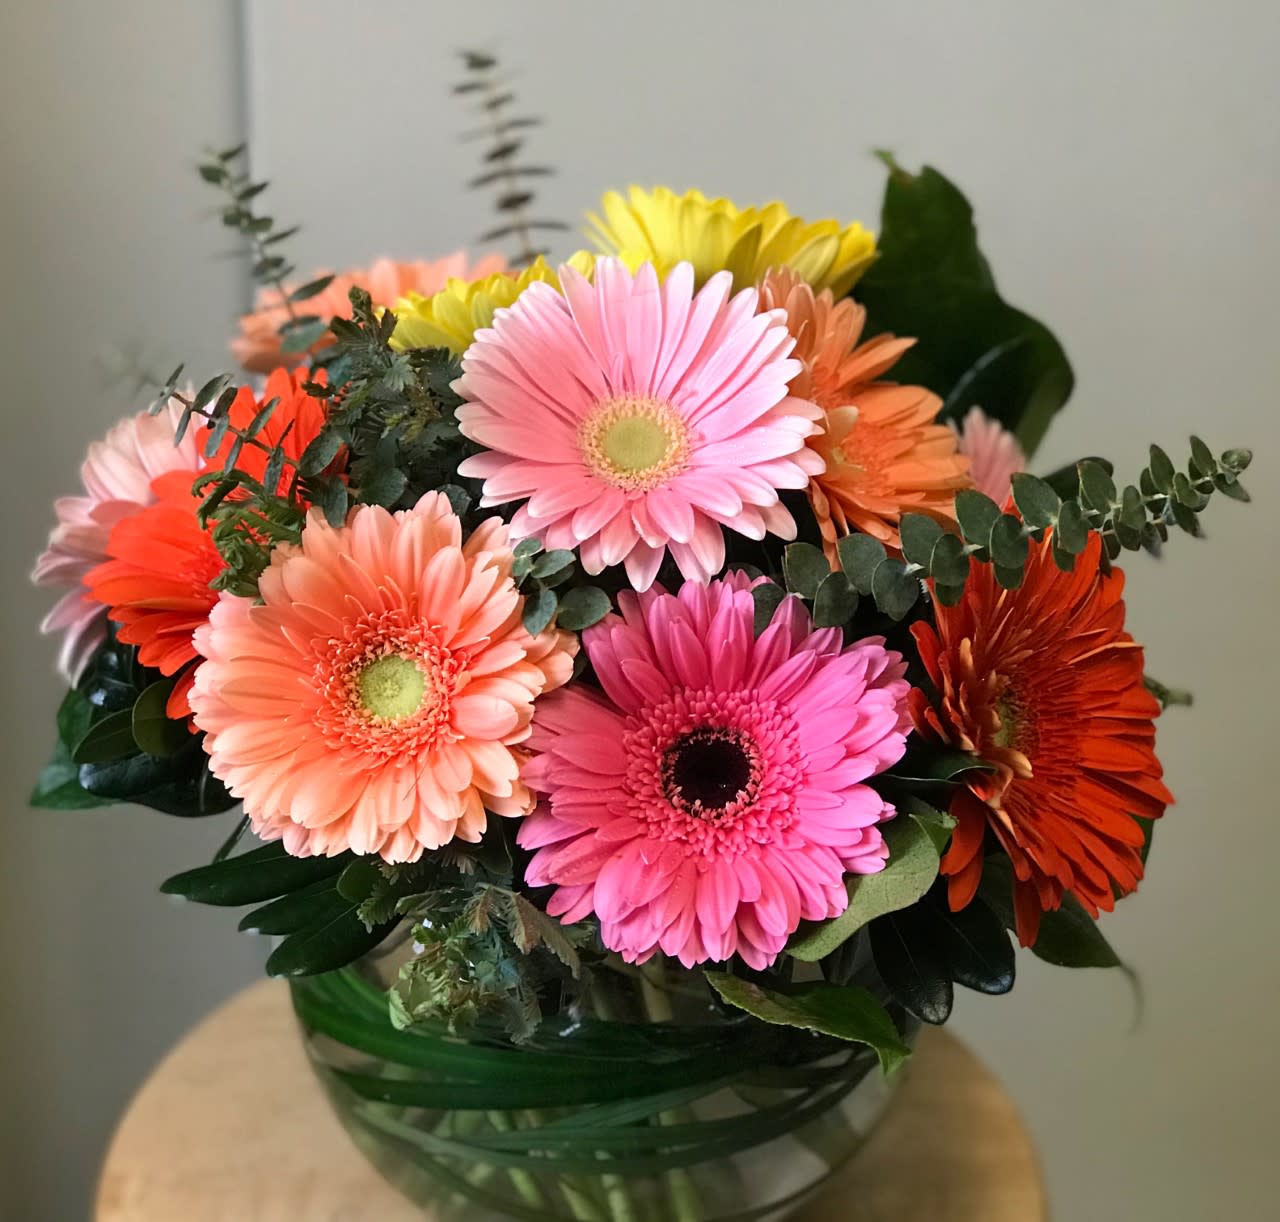 Gerbera Fun Bowl - An array of colorful Gerbera daisies, beautiful and perfect for any occasion!!